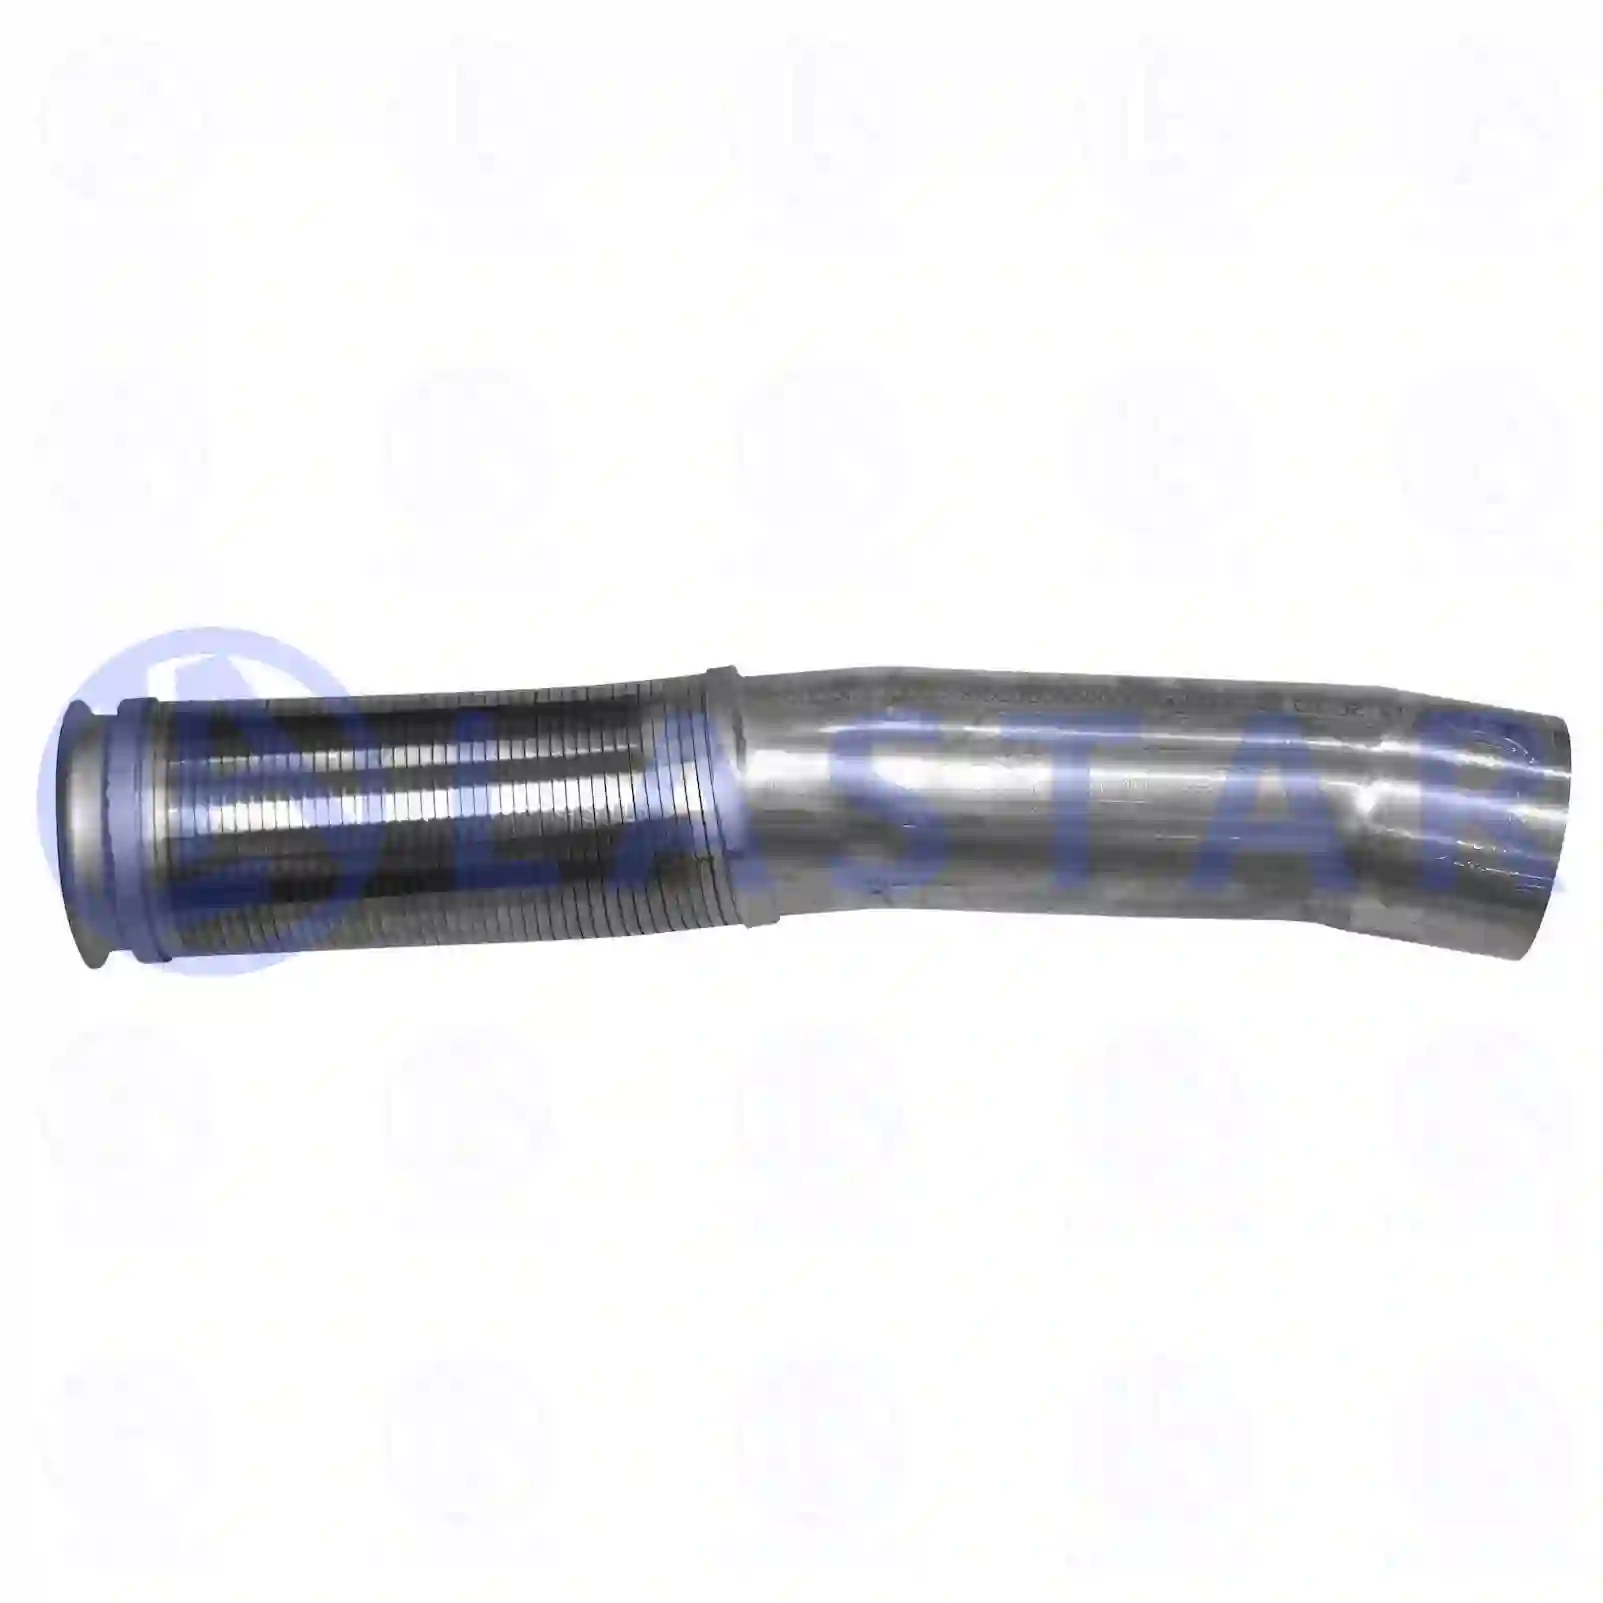 Exhaust pipe, 77706334, 9424901019, 94249 ||  77706334 Lastar Spare Part | Truck Spare Parts, Auotomotive Spare Parts Exhaust pipe, 77706334, 9424901019, 94249 ||  77706334 Lastar Spare Part | Truck Spare Parts, Auotomotive Spare Parts